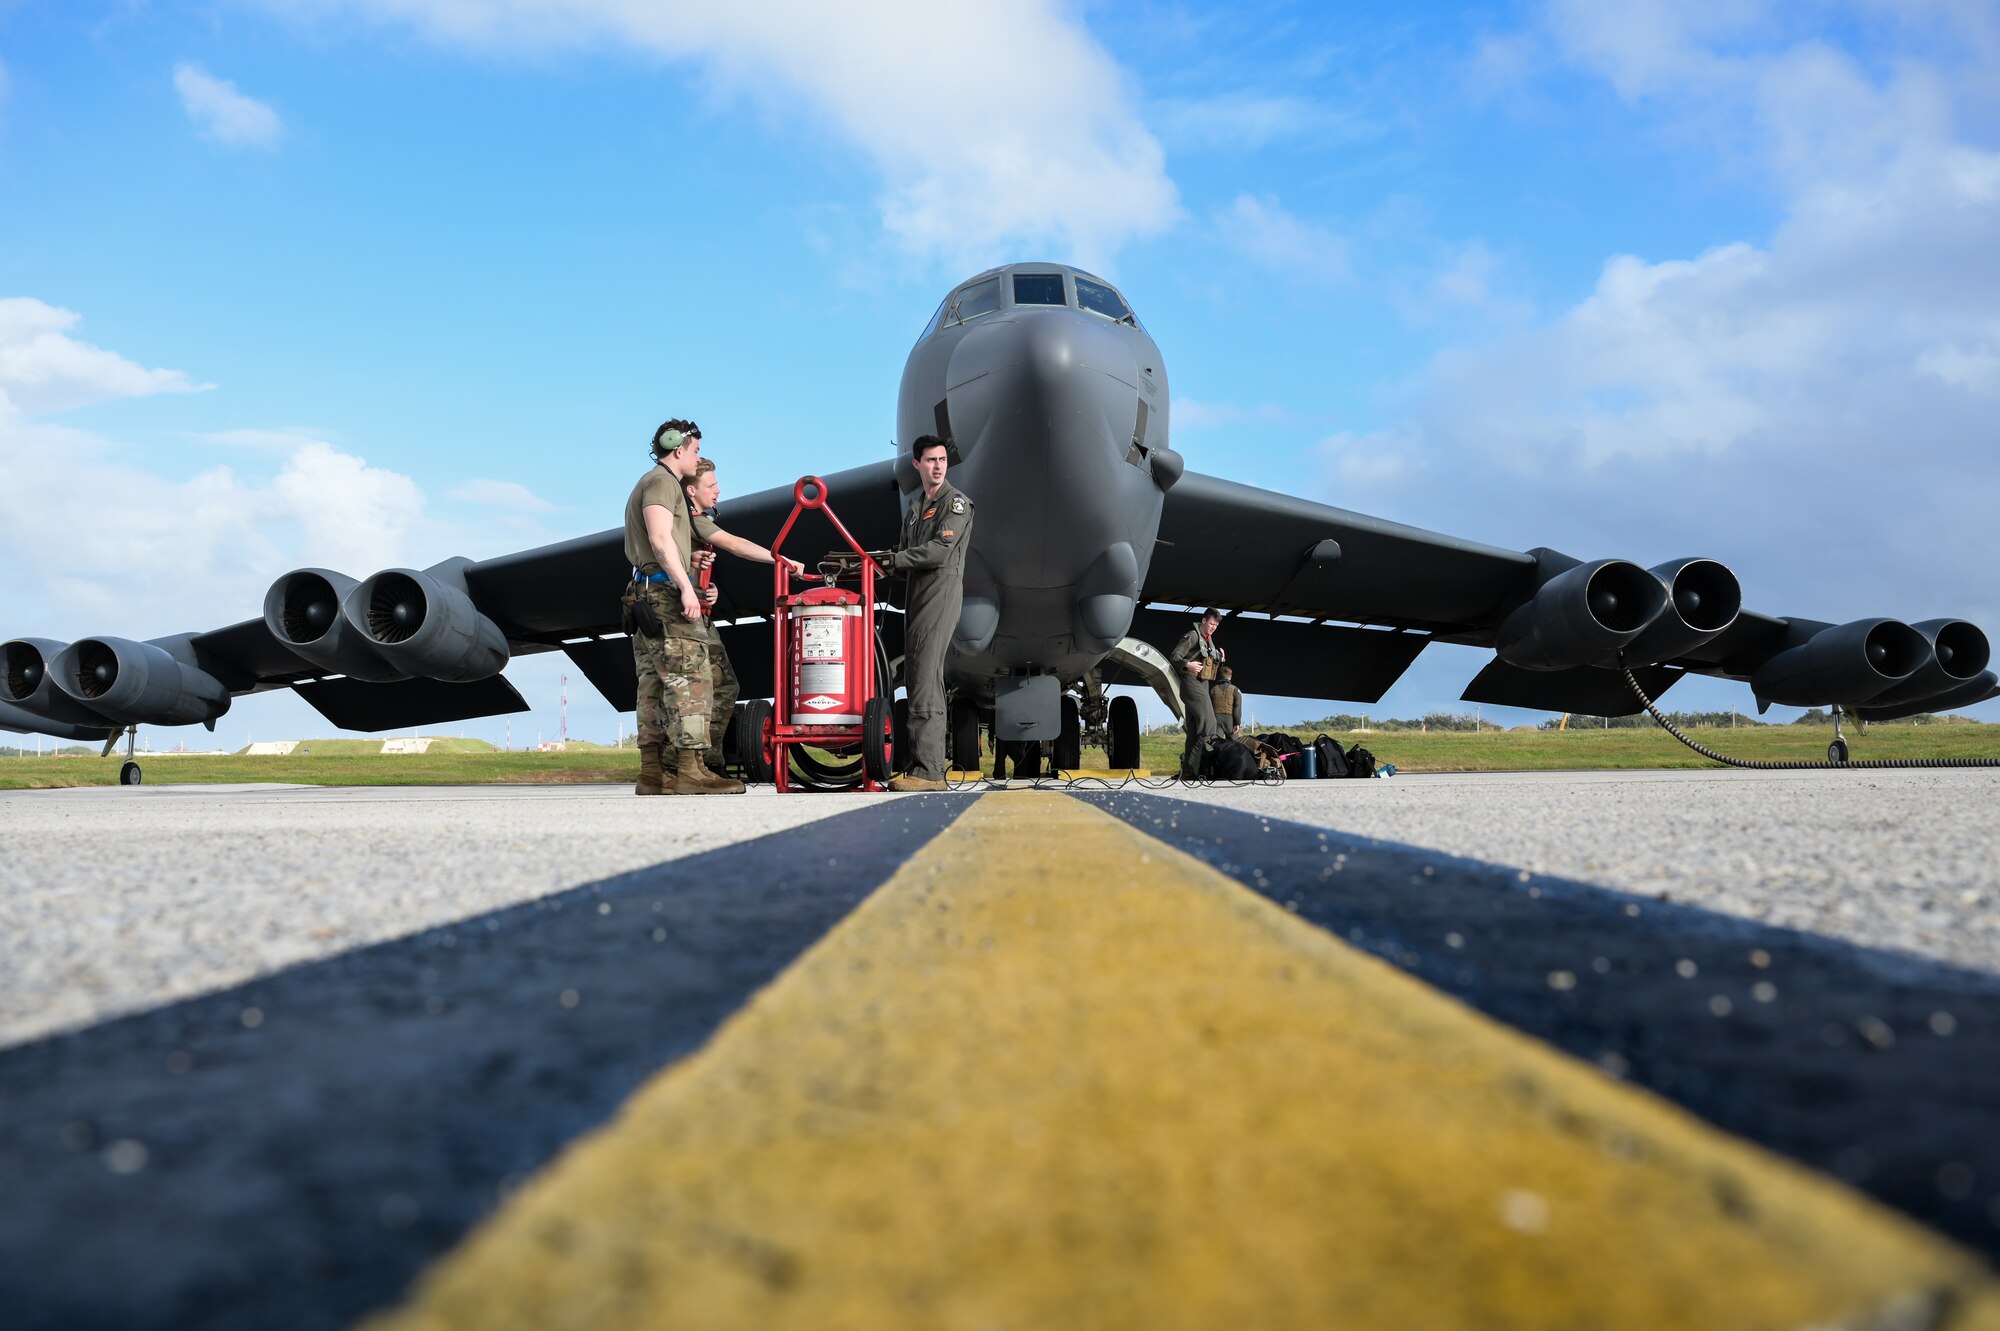 U.S. Air Force Capt. Jonathan Hutnicki, pilot, assigned to the 23rd Expeditionary Bomb Squadron and Airmen from the 5th Maintenance Squadron prepare for a routine Bomber Task Force mission at Andersen Air Force Base, Guam, Feb. 16, 2024. Bomber missions provide opportunities to train and work with our Allies and partners in joint and coalition operations and exercises. (U.S. Air Force photo by Master Sgt. Amy Picard)